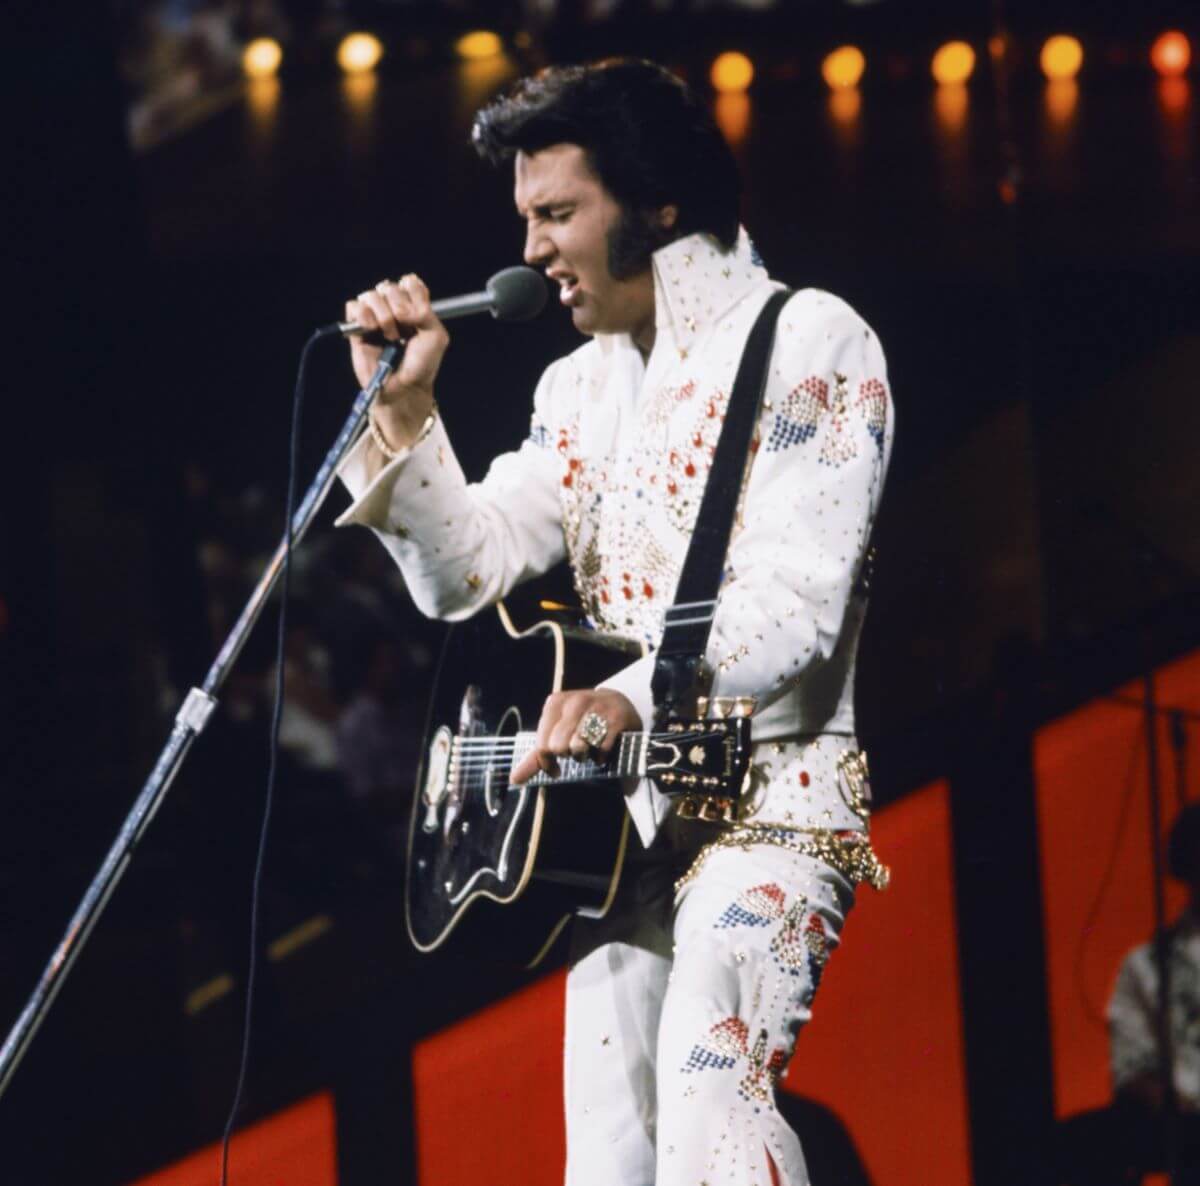 Elvis Presley in a white suit